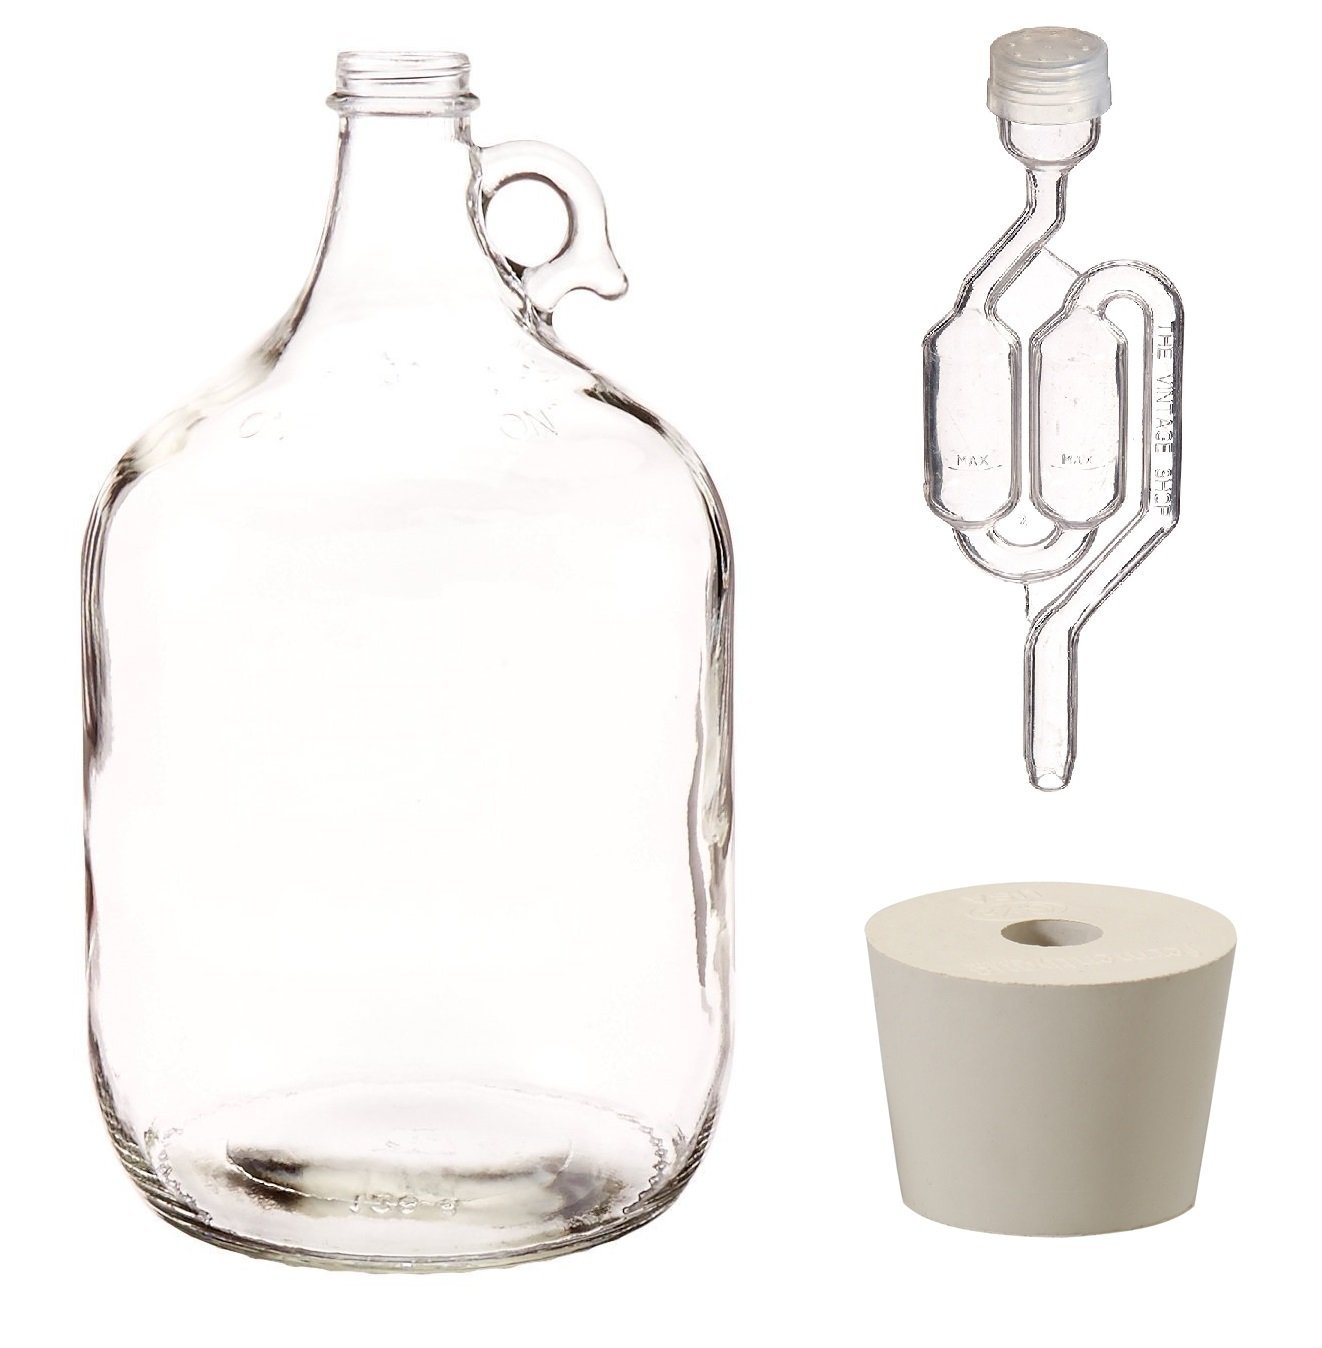 https://www.northmountainsupply.com/images/product/NMS_38_Gallon_Jug_-_6.5__S-Type.jpg